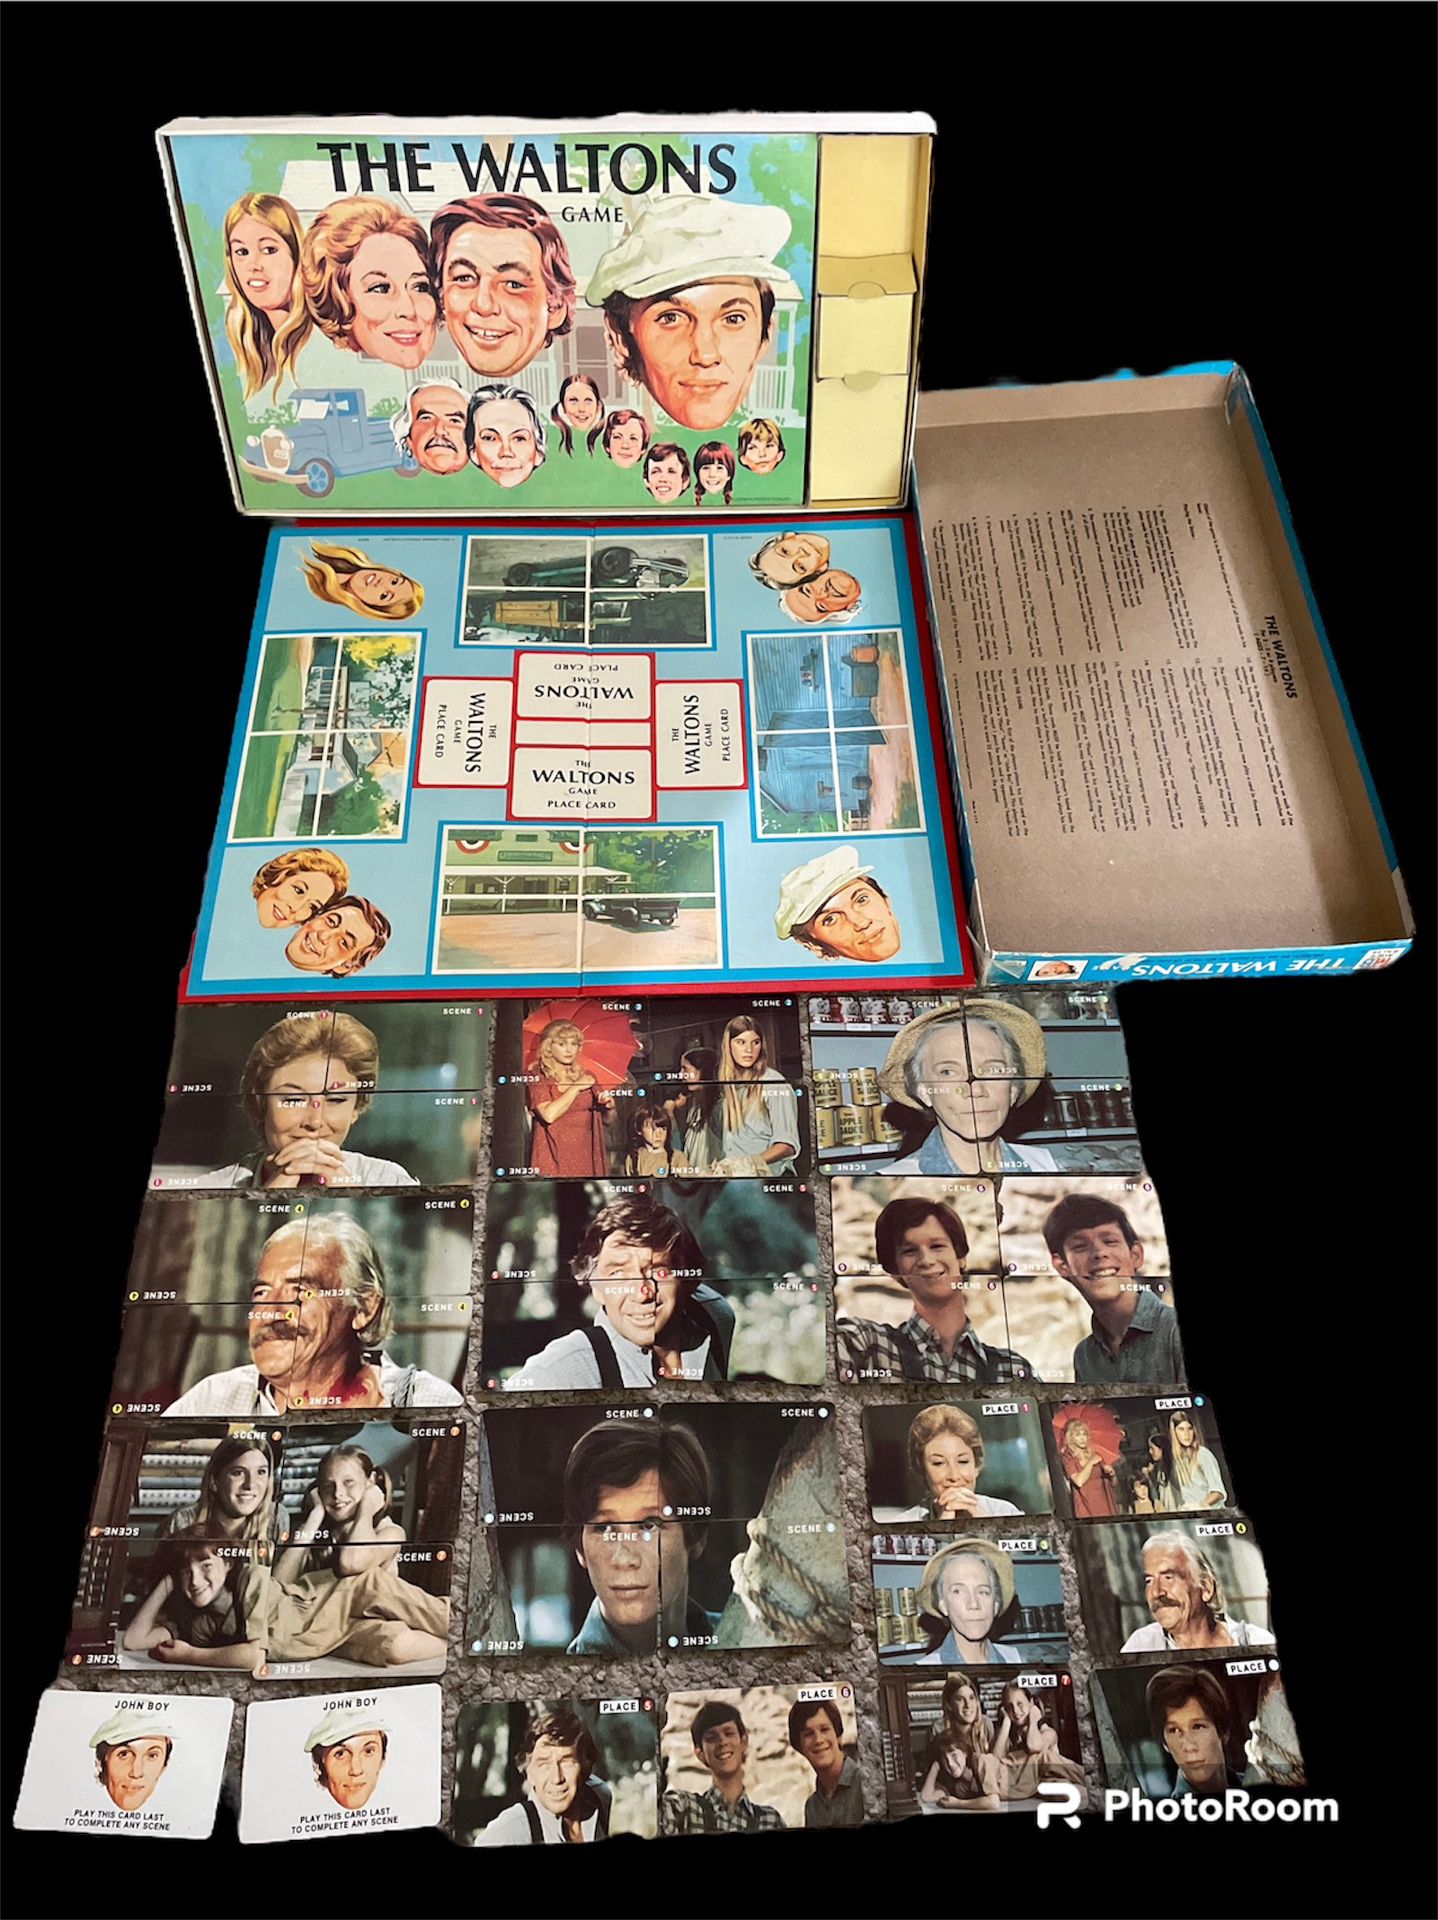 Vintage “THE WALTONS” Board Game. COMPLETE